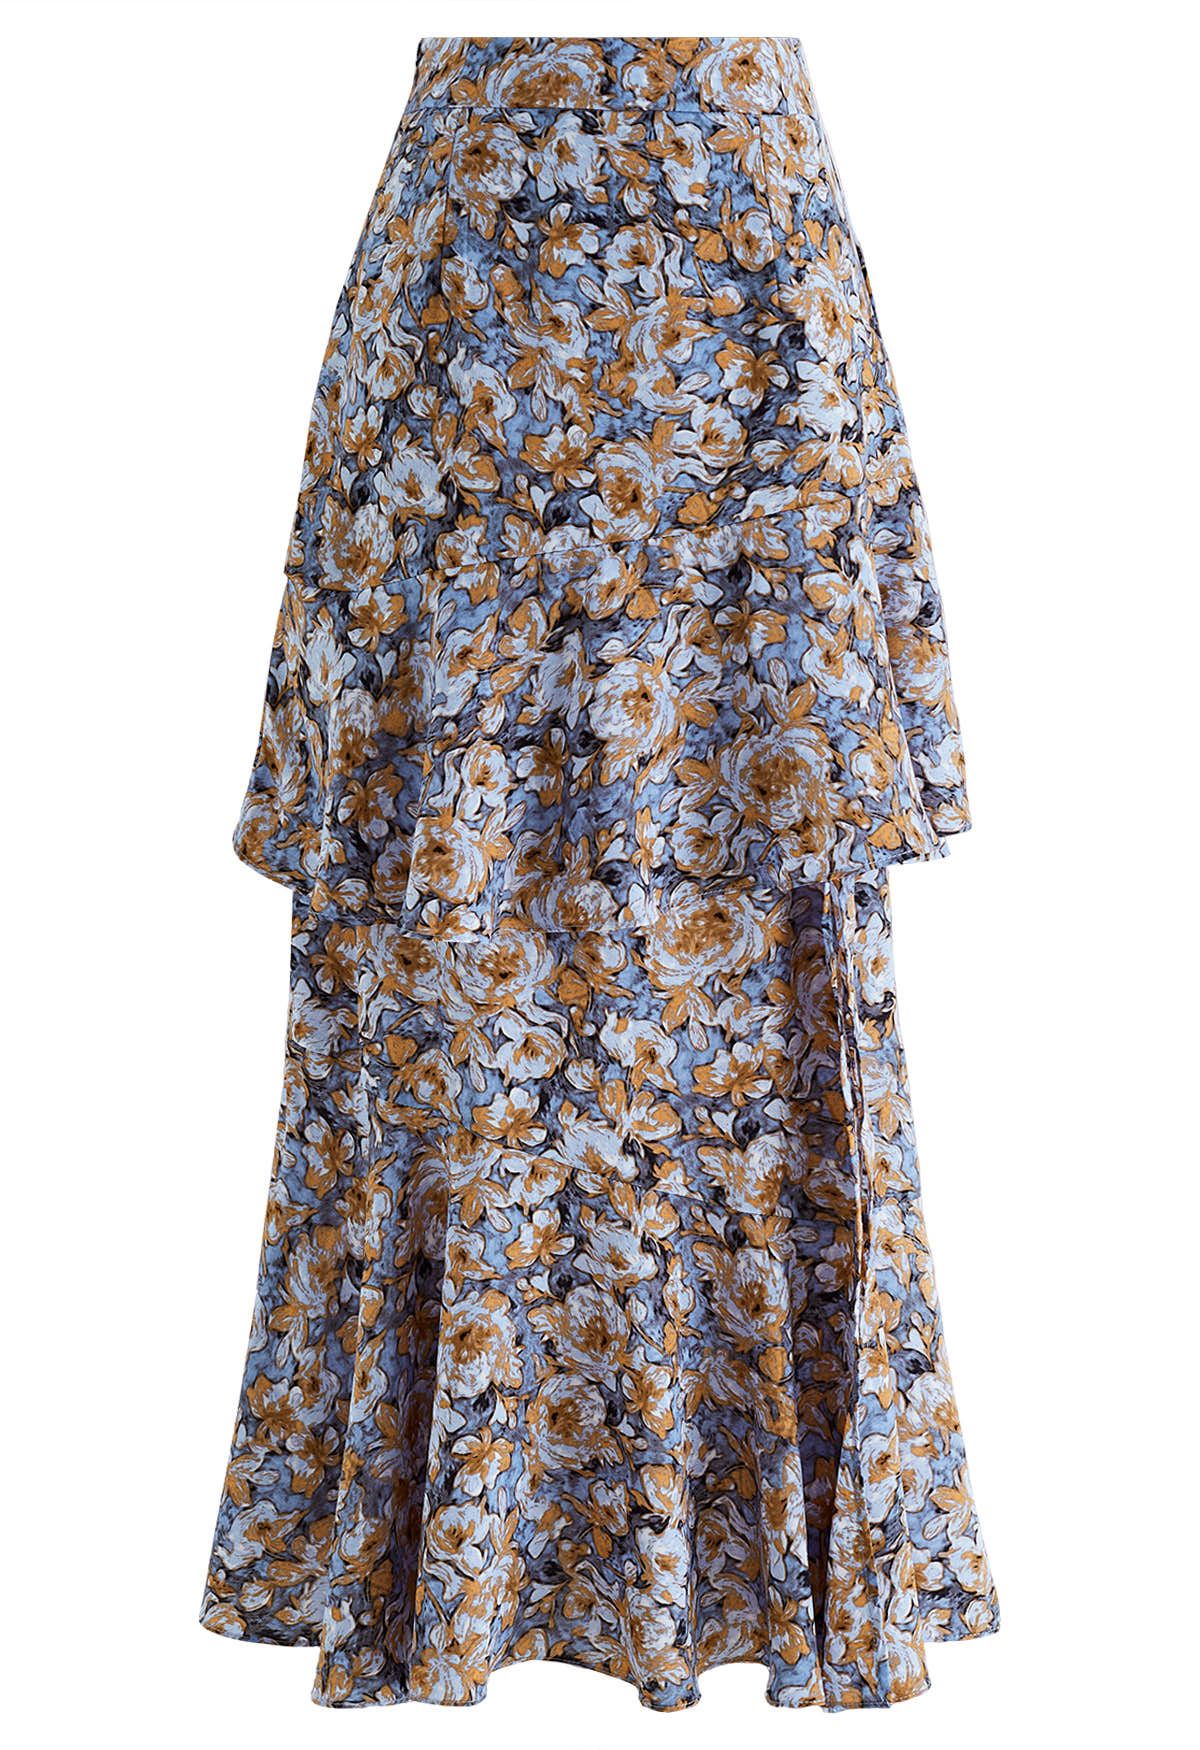 Floral Oil Painting Ruffle Maxi Skirt in Blue - Retro, Indie and Unique ...